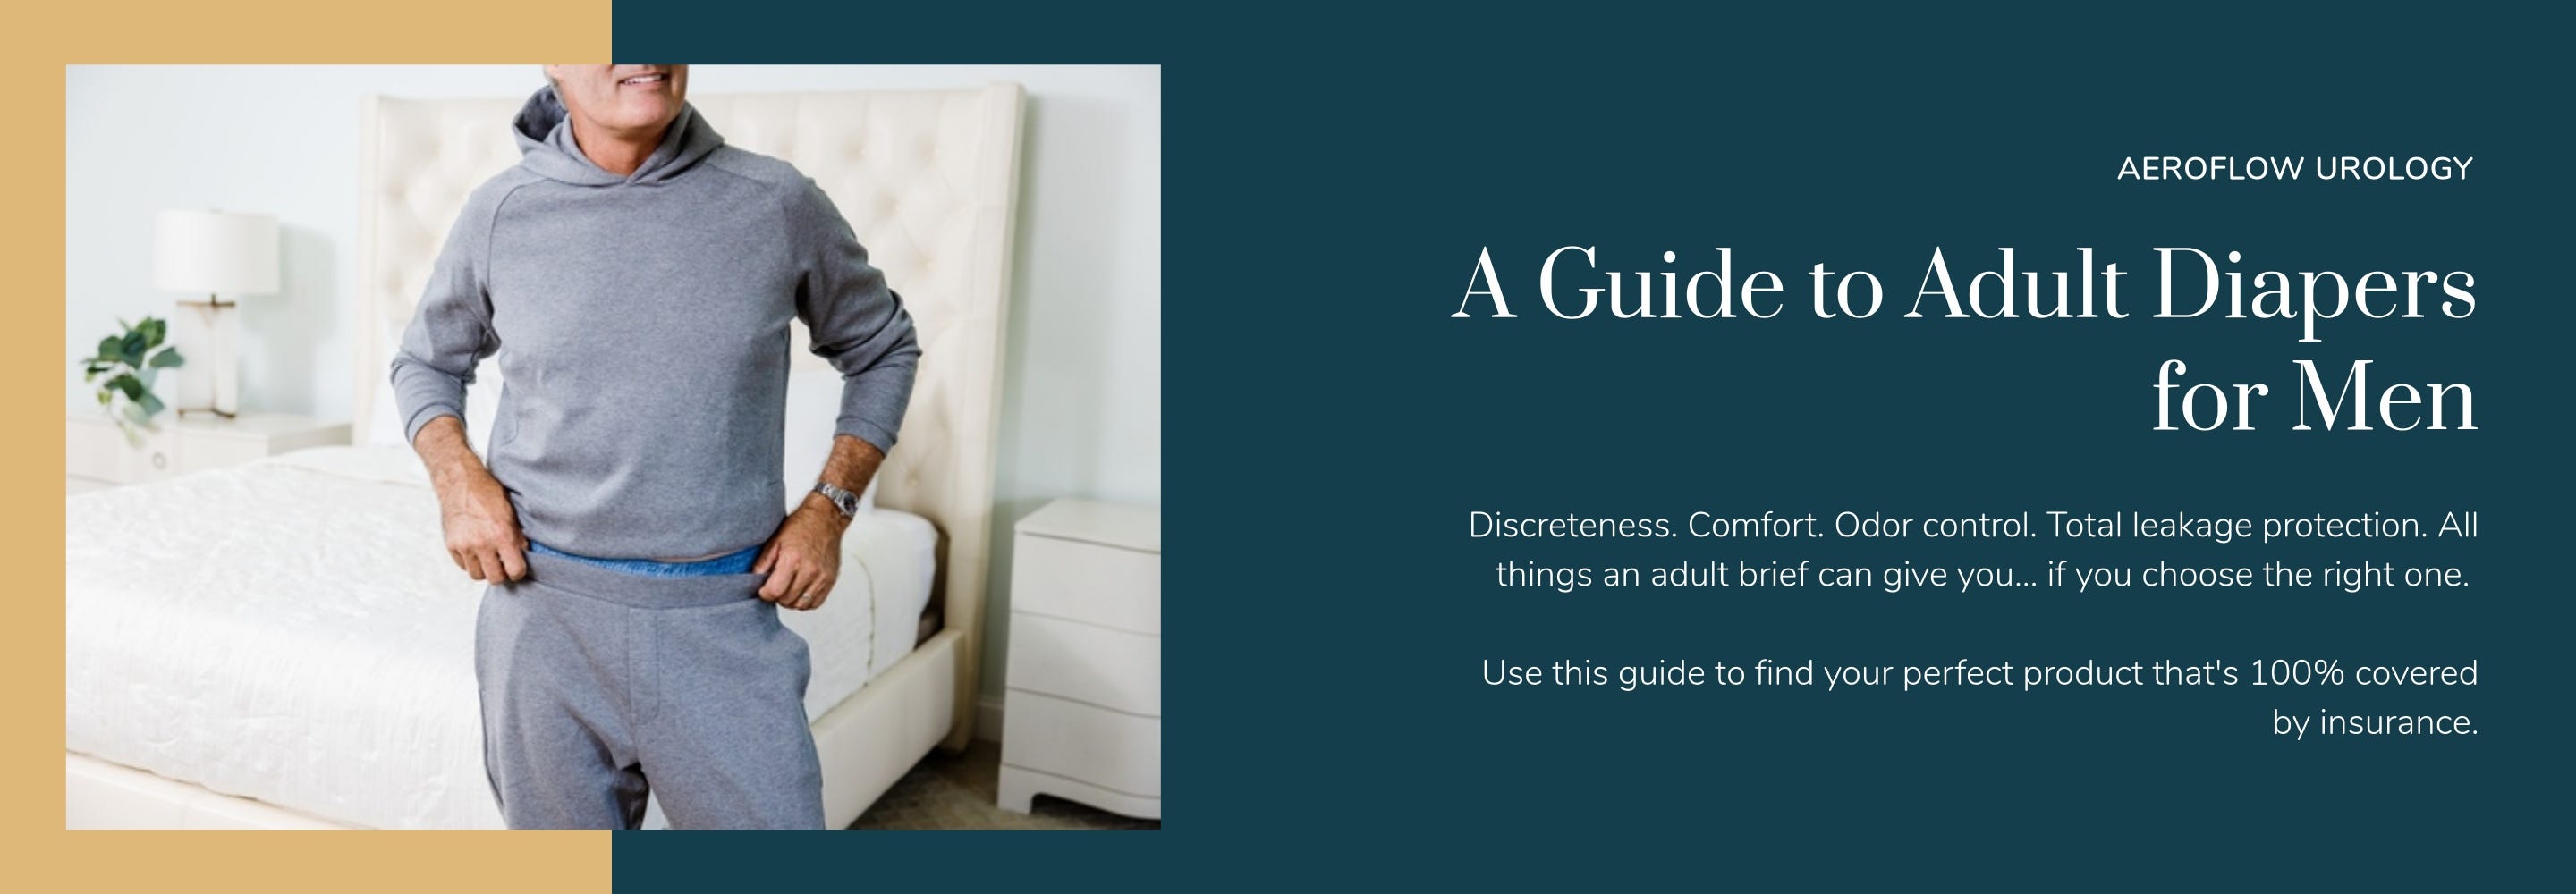 A Guide to Adult Diapers for Men